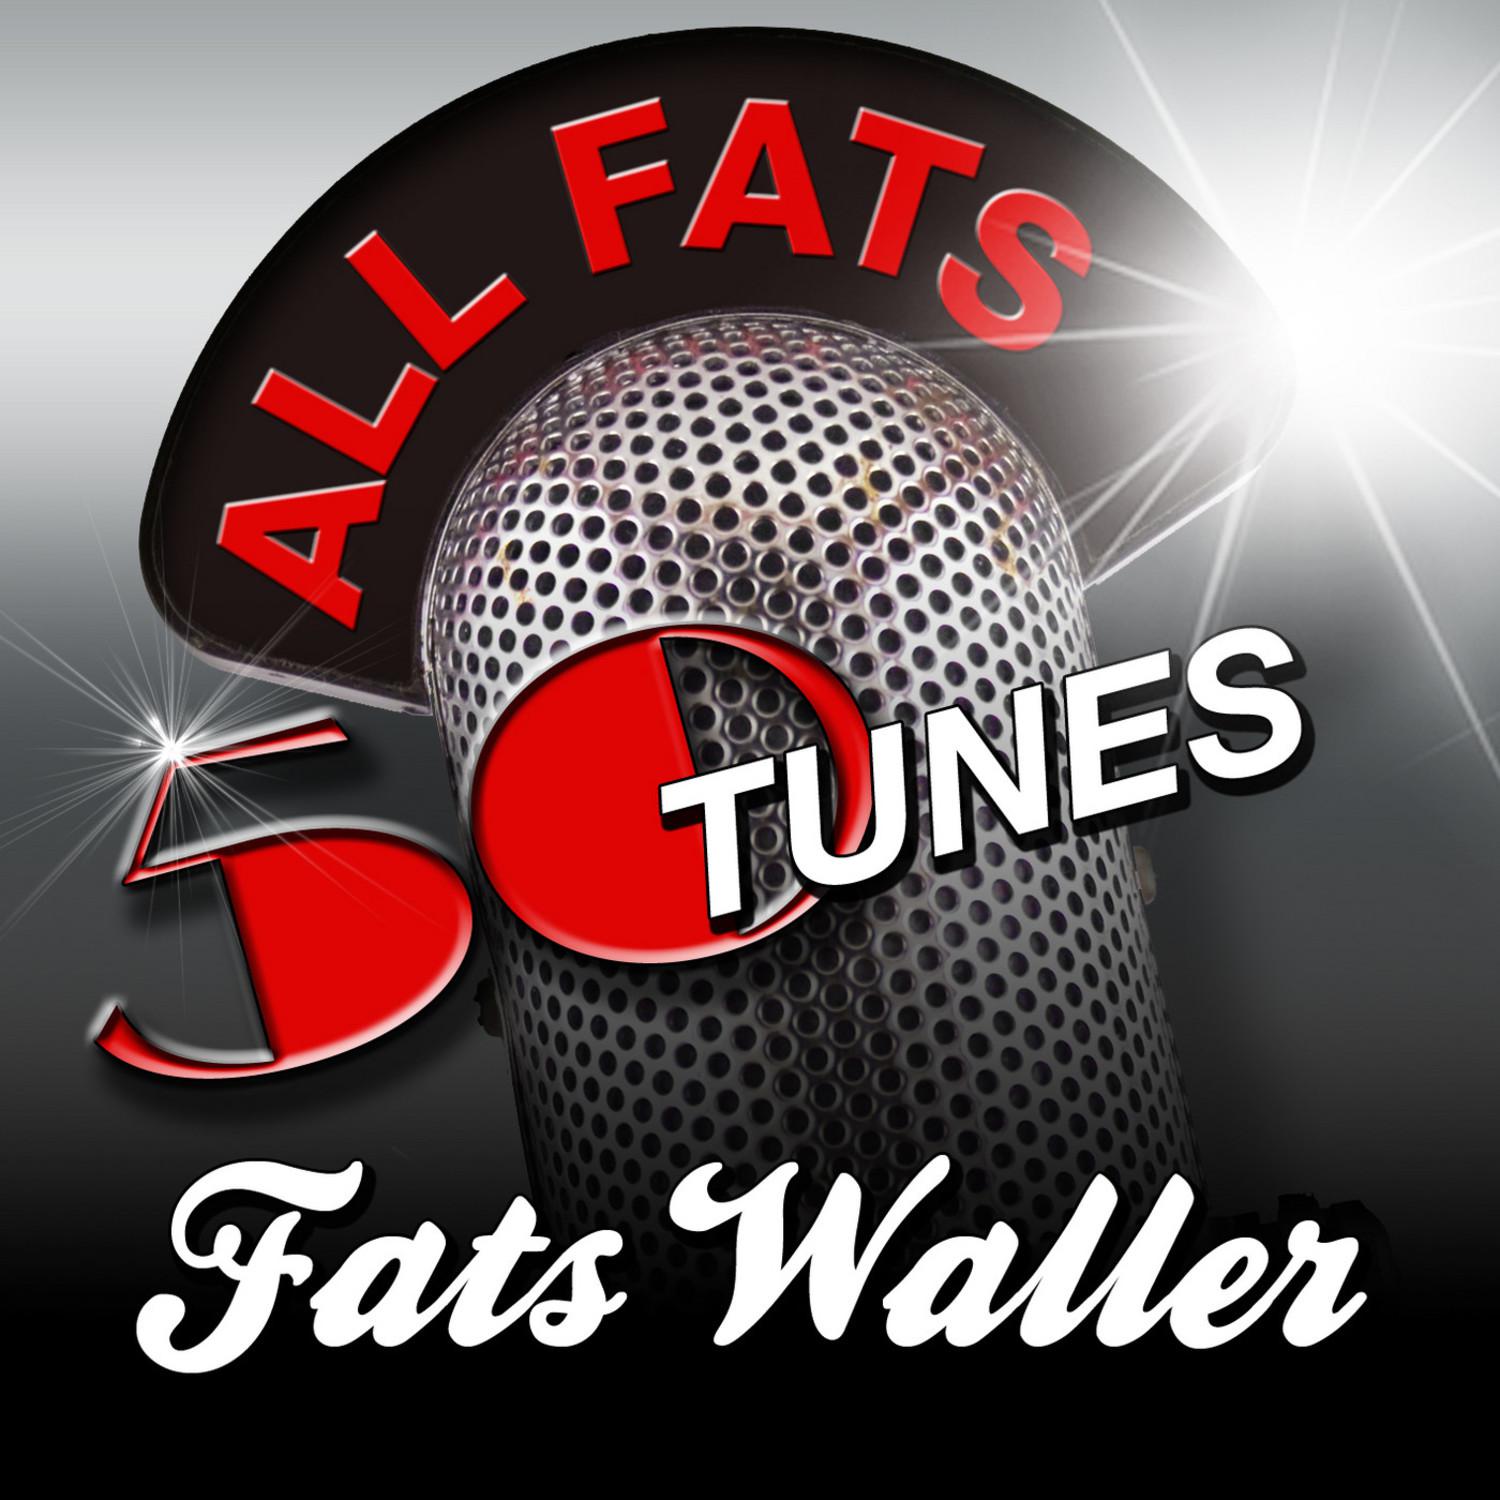 All Fats - 50 Songs Tunes